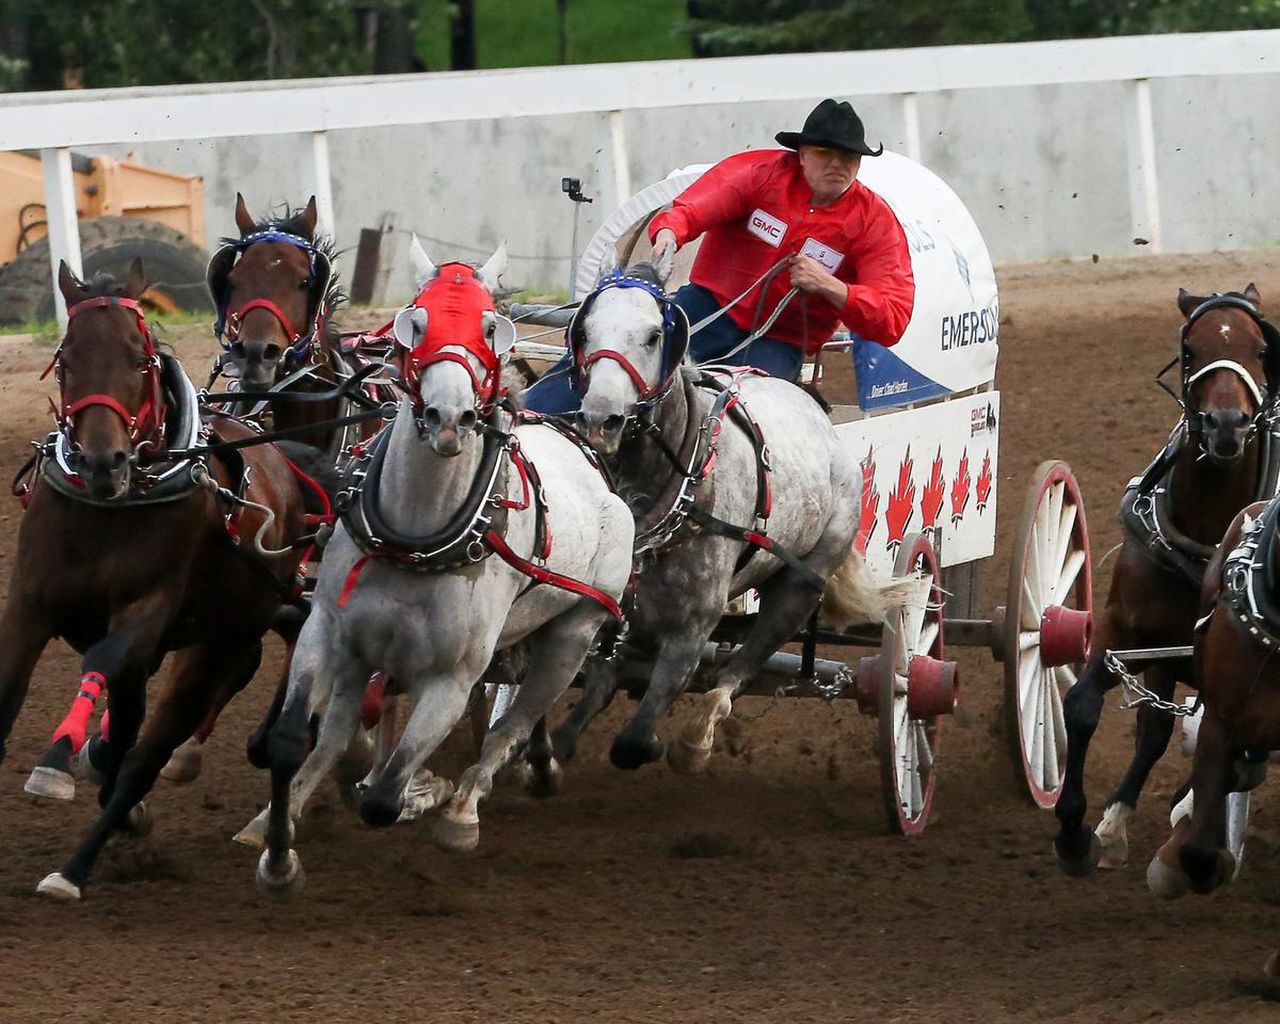 Stampede visitors weigh in on chuckwagon racing following 6 horse deaths